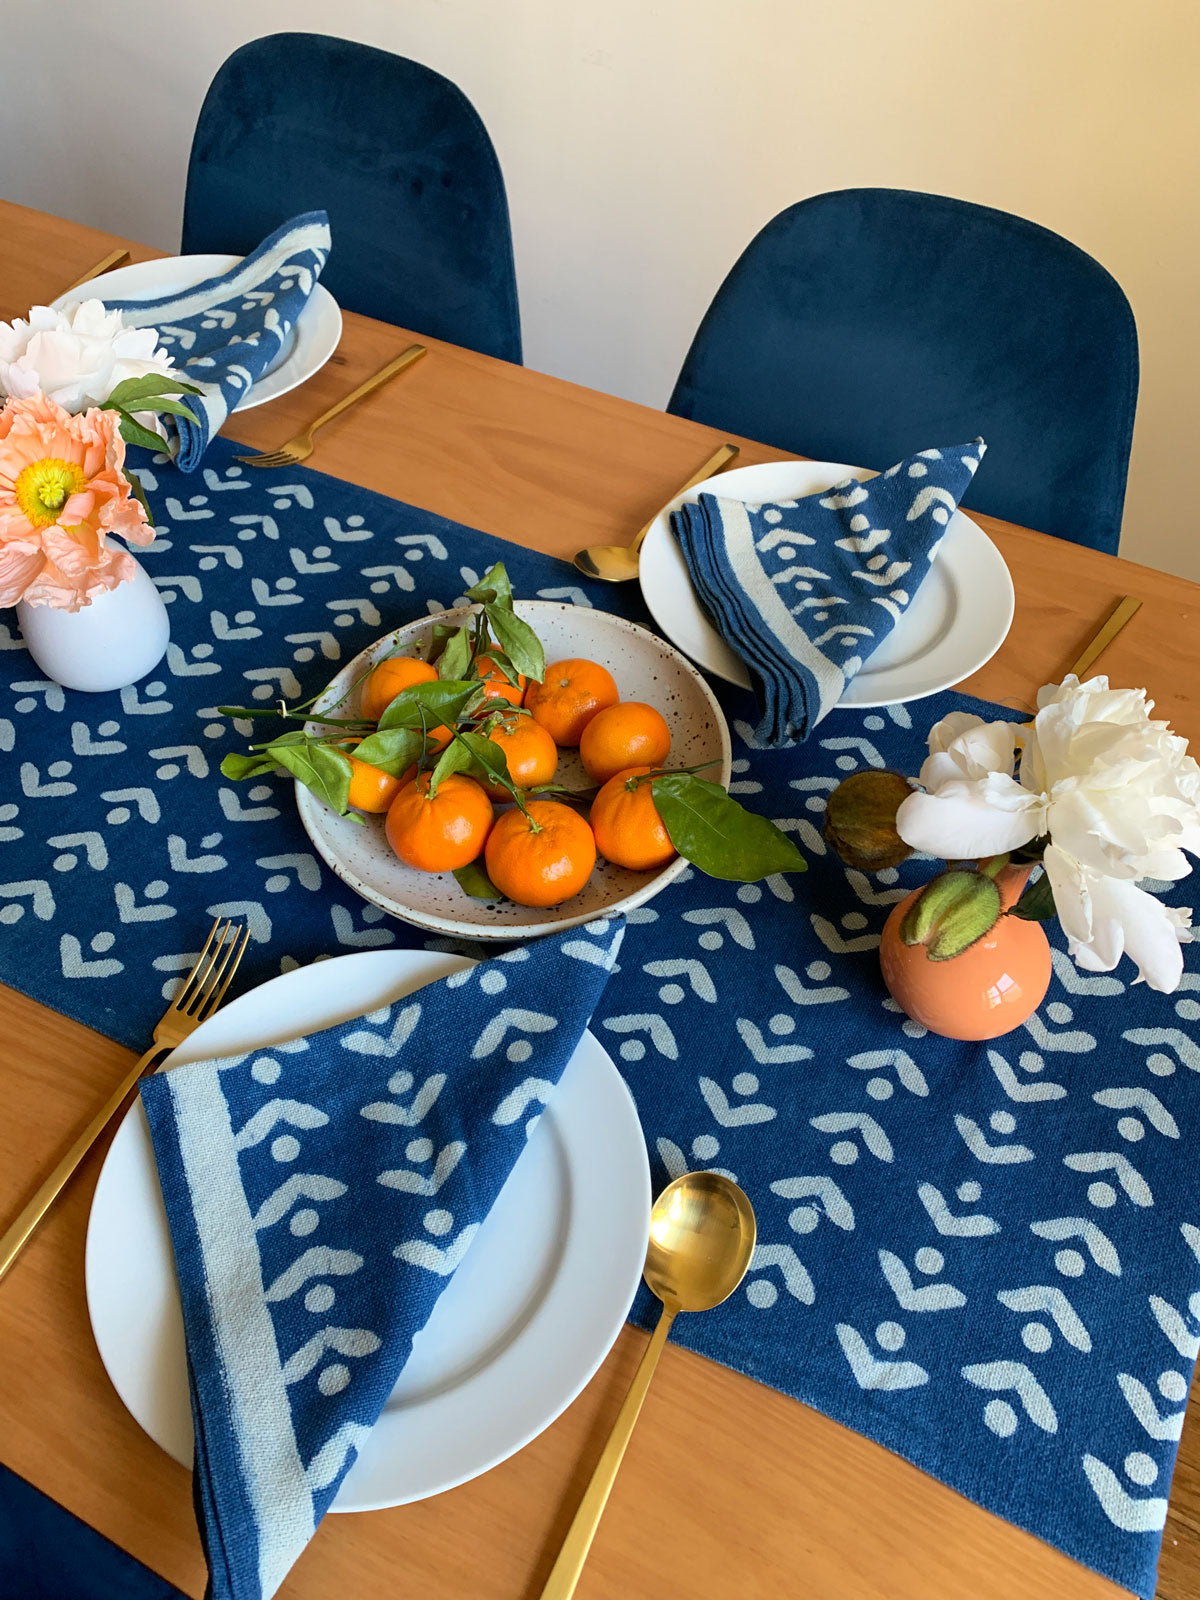 SUNDAY/MONDAY's hand block printed EGRET table runner and napkins. Printed with mud resist and dyed with natural indigo in India. Blue and white floral inspired table linens. 